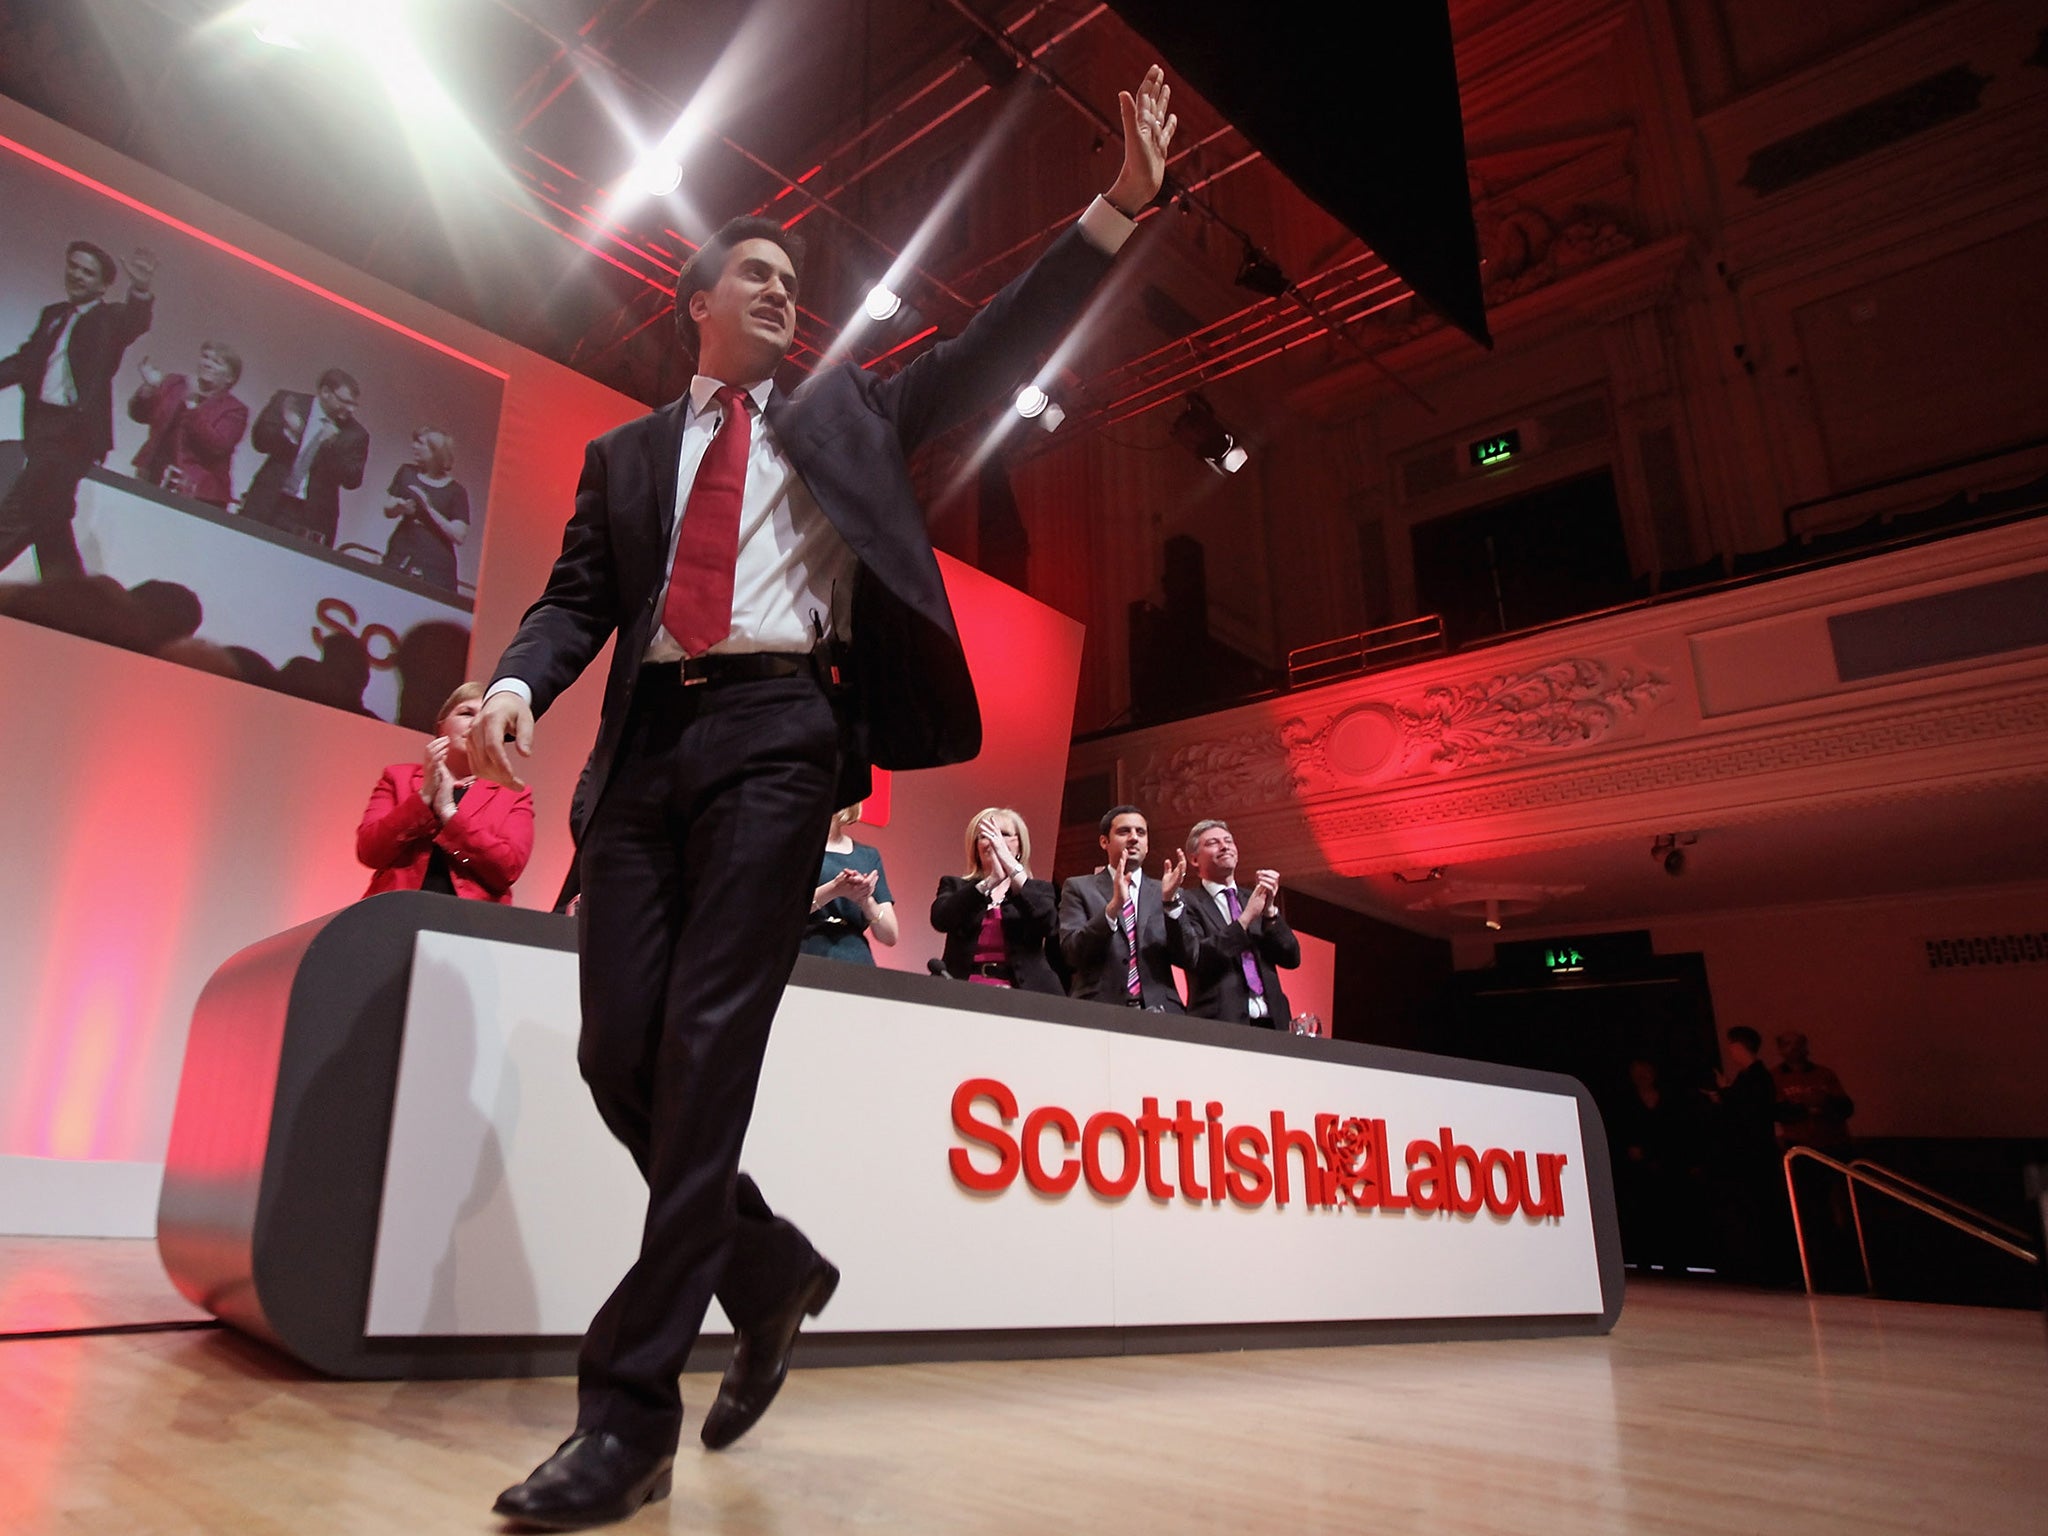 Miliband's schedule of campaign visits to Scotland has been upgraded. He promised the audience in Edinburgh, against a backdrop of the capital’s castle, that he would be back.